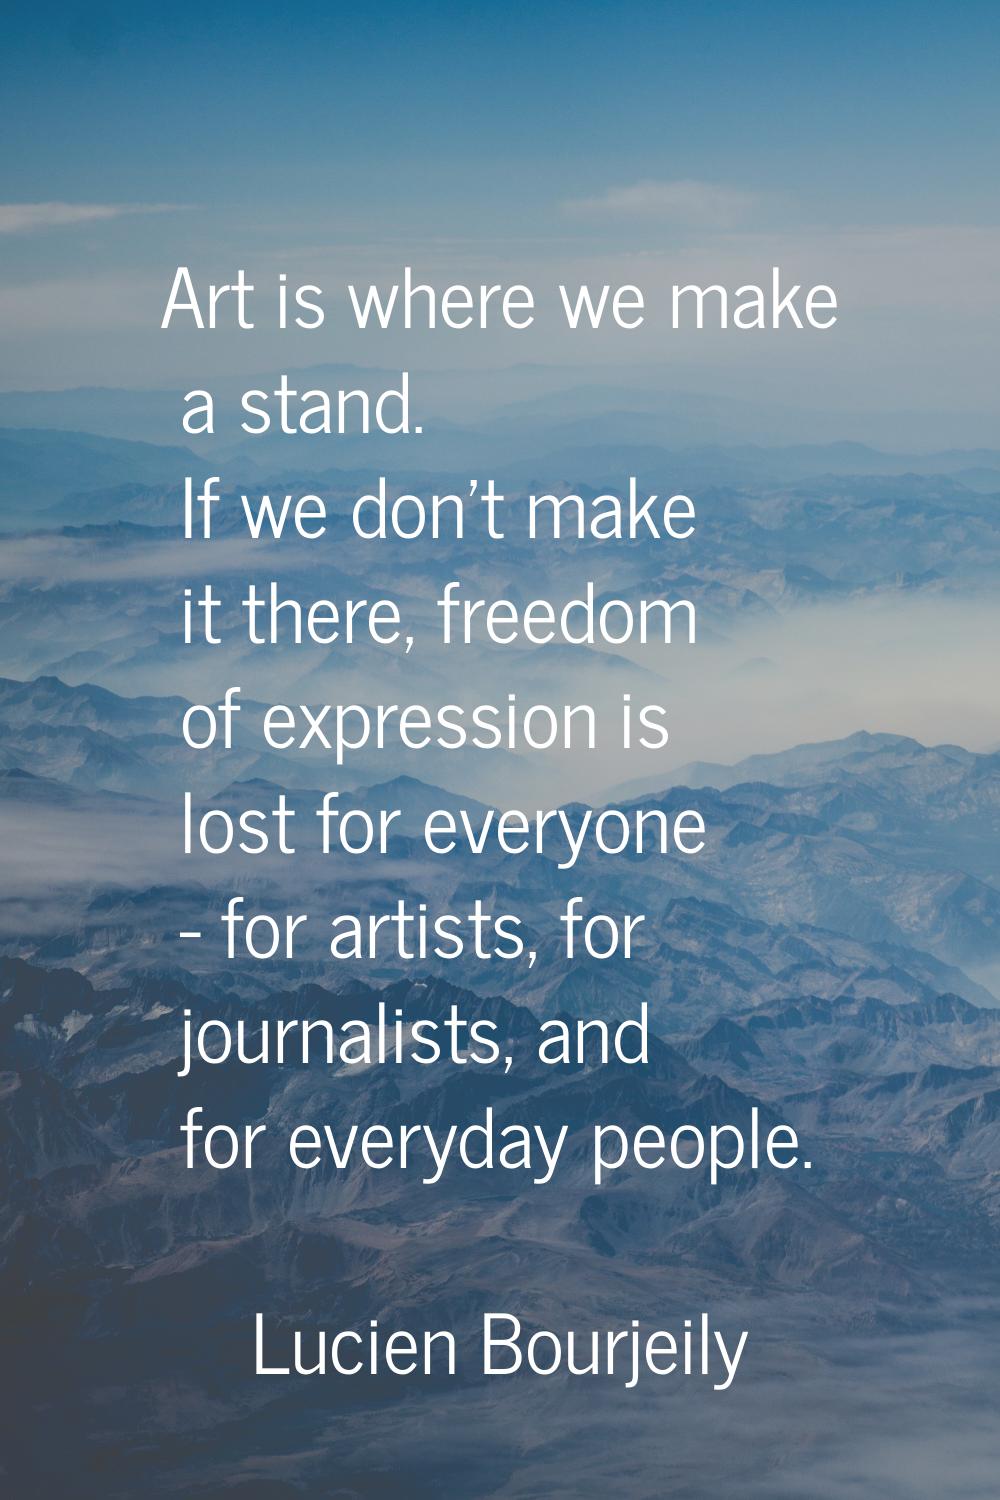 Art is where we make a stand. If we don't make it there, freedom of expression is lost for everyone